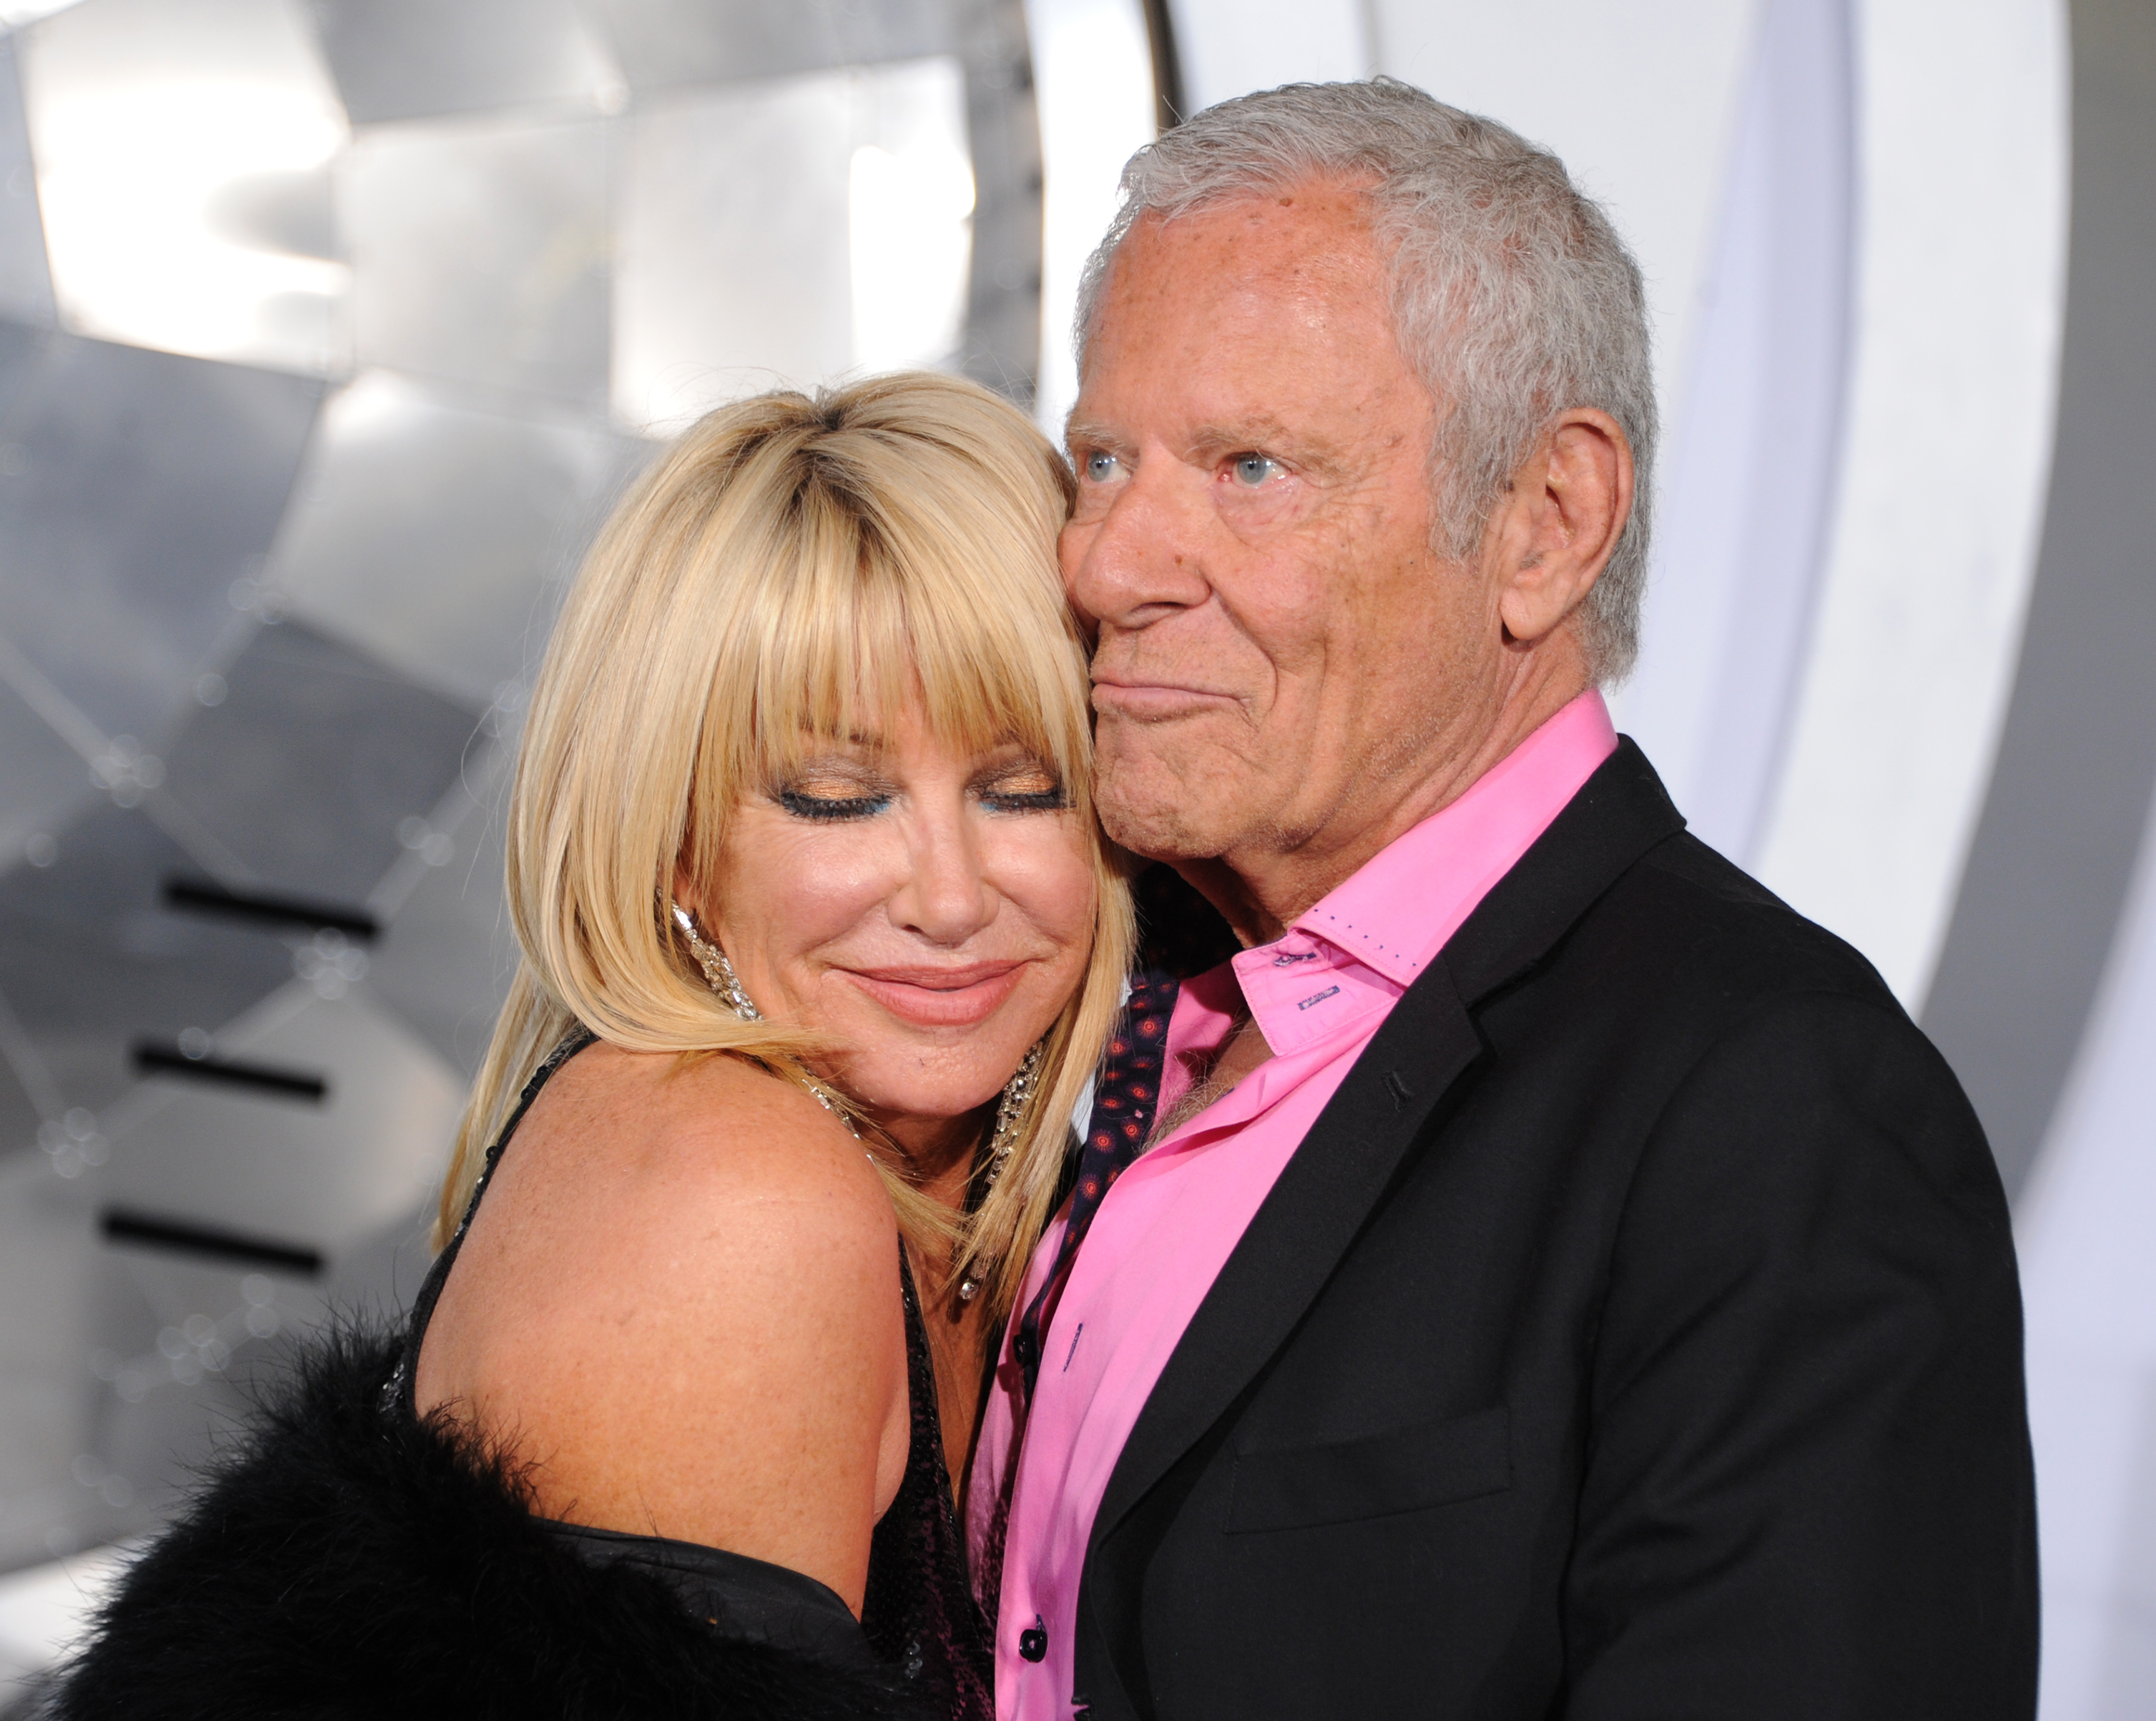 Suzanne Somers and Alan Hamel at the premiere of Columbia Pictures' "Passengers" in Westwood, California on December 14, 2016| Source: Getty Images